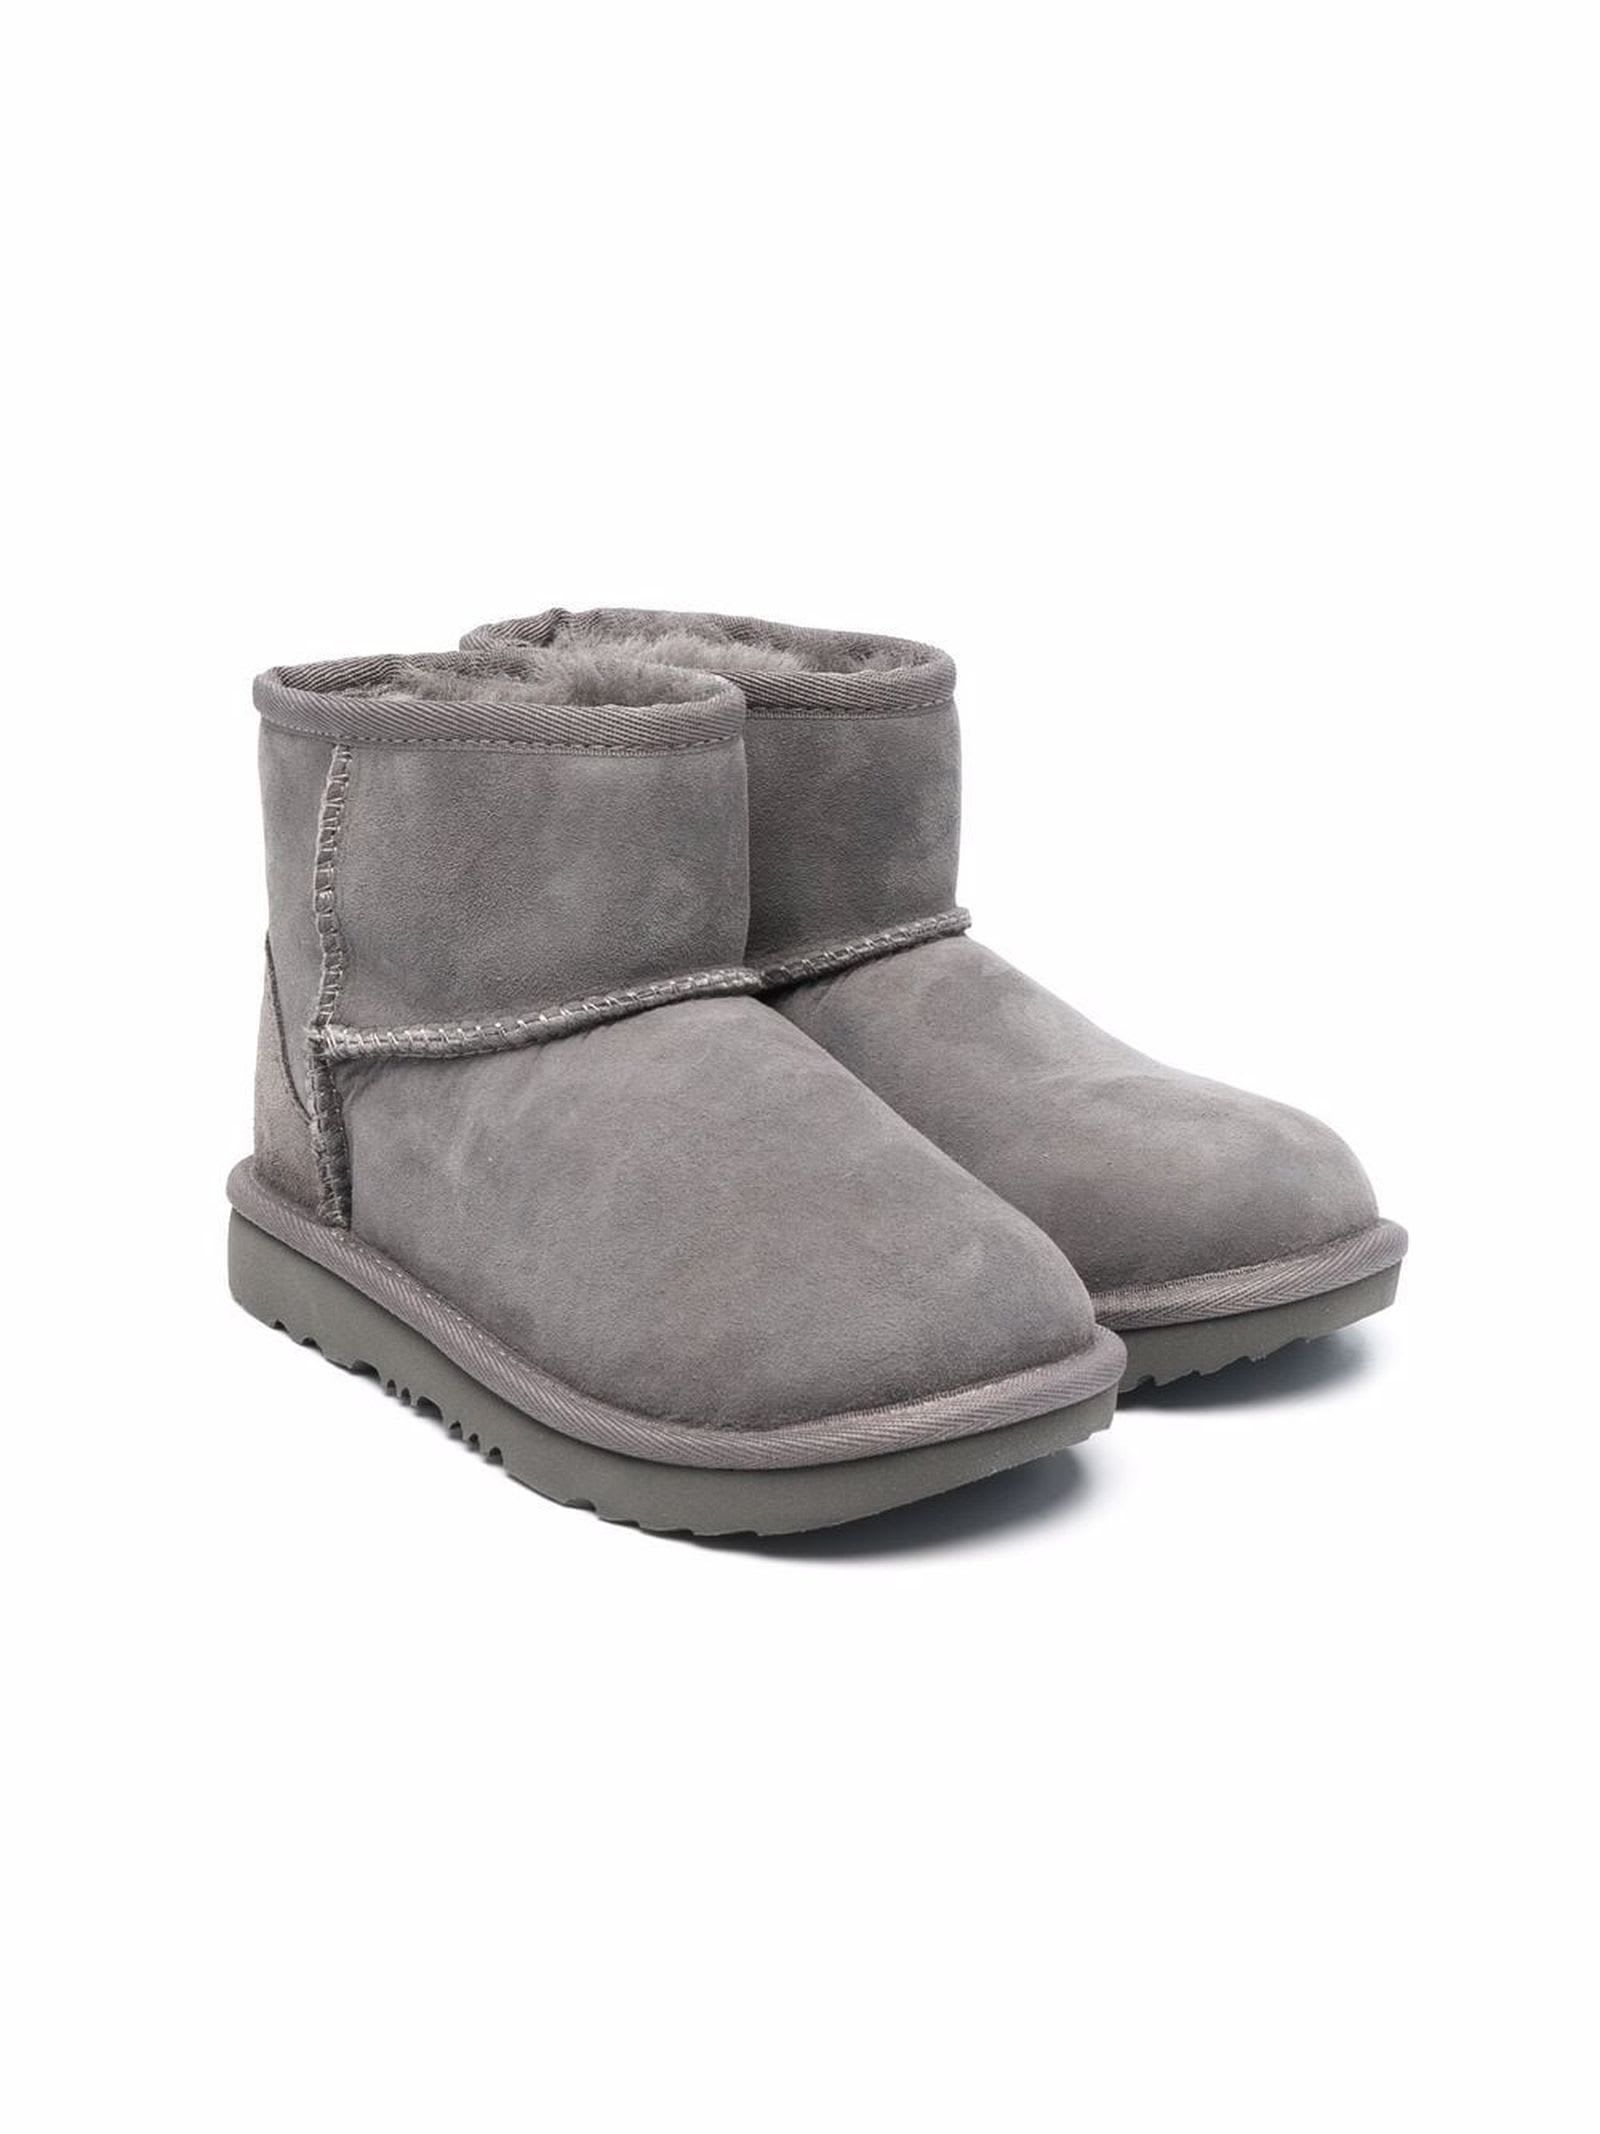 UGG Grey Wool Ankle Boots